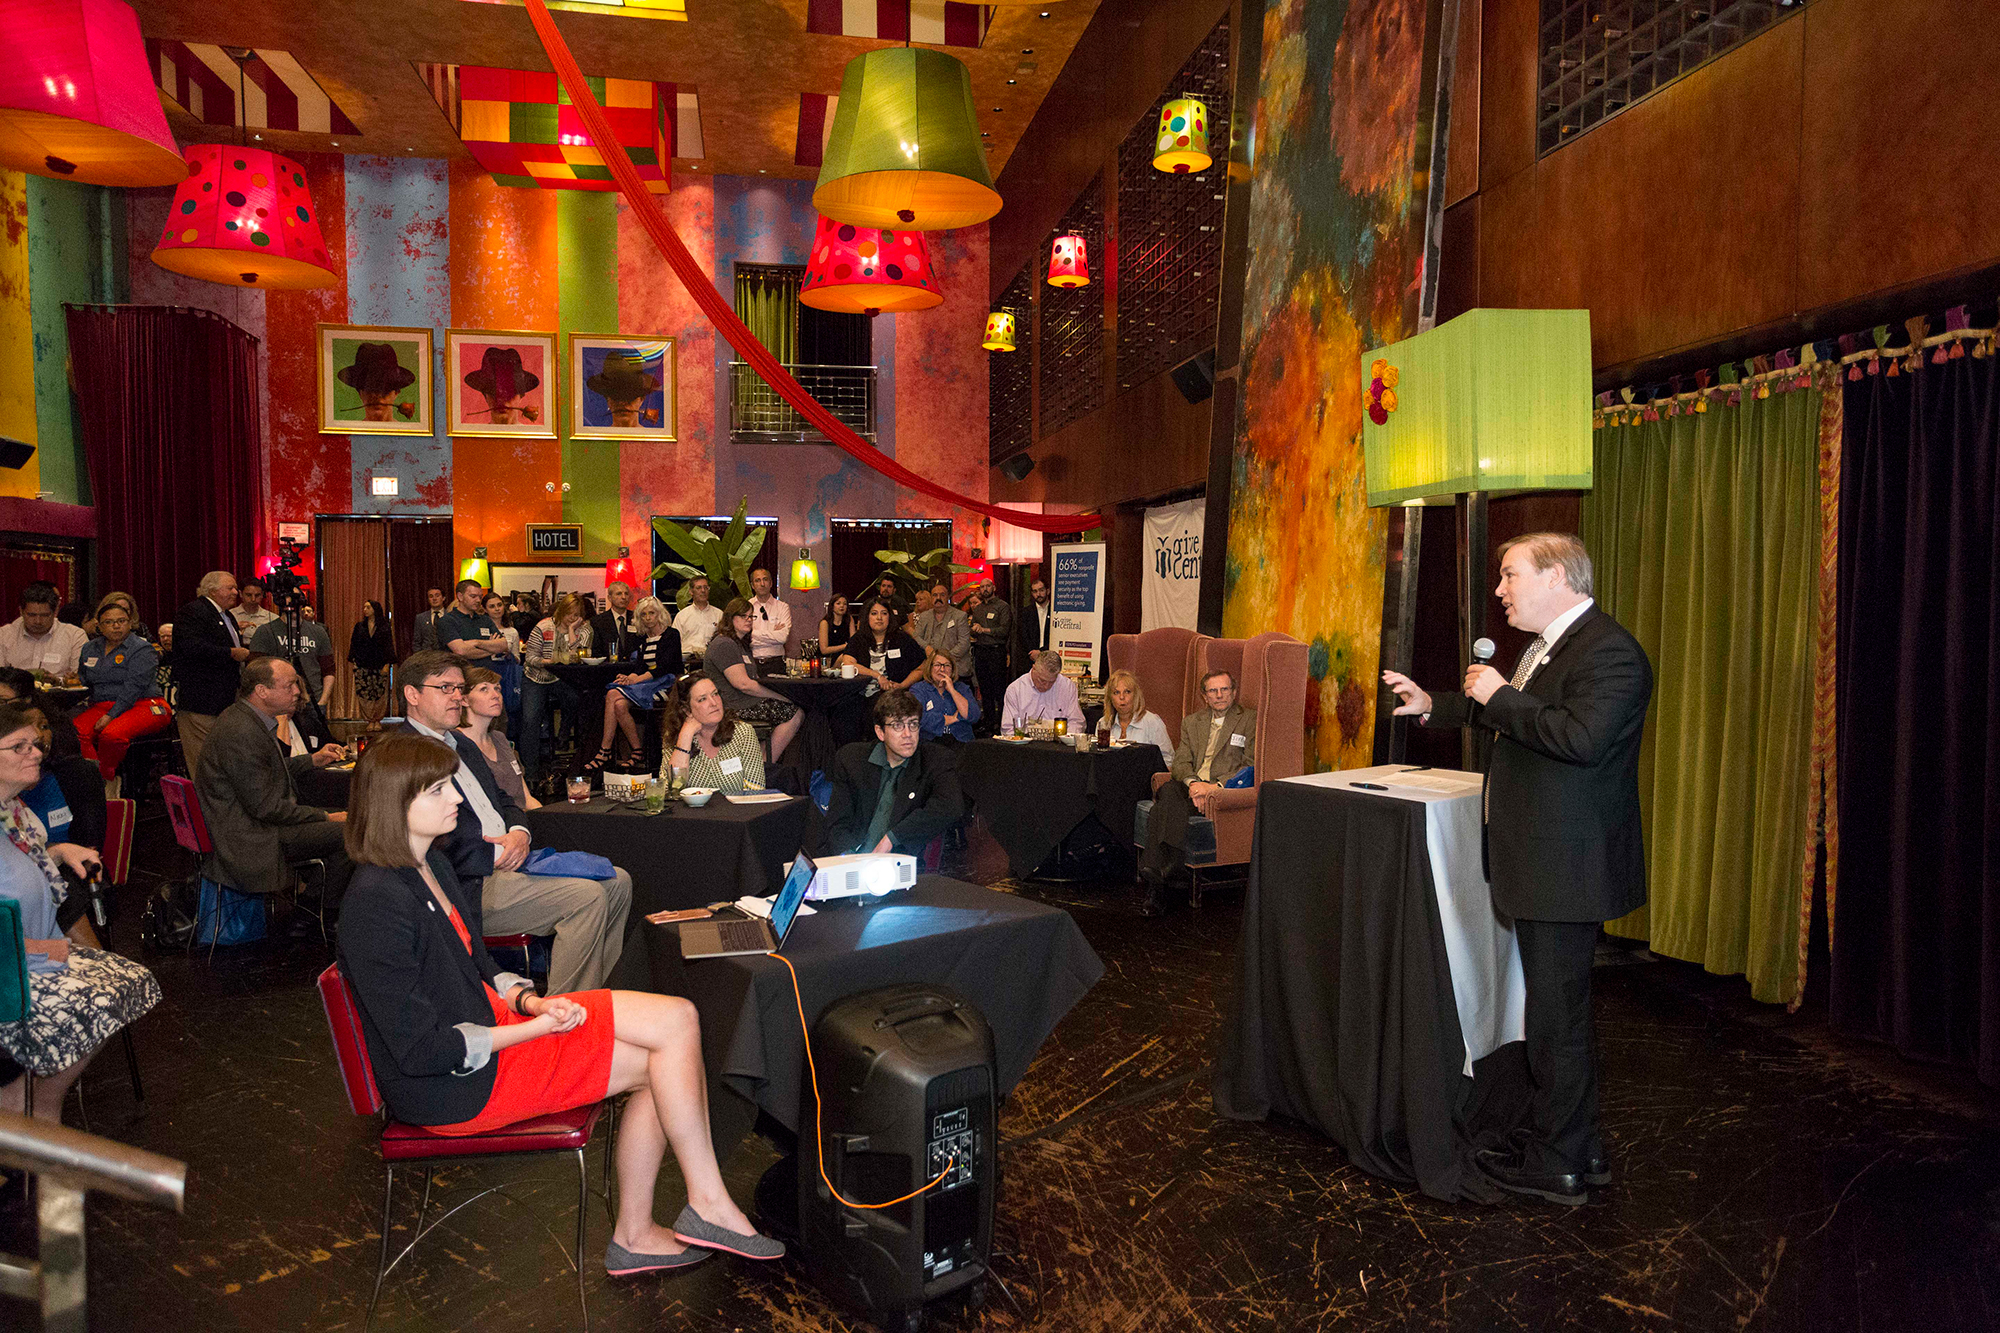 May, 2018, in Carnivale Restaurant, on Fulton Street in Chicago. In this image, you see Patrick explaining the benefits of the new Give Central program, provided by the Coleman Group.